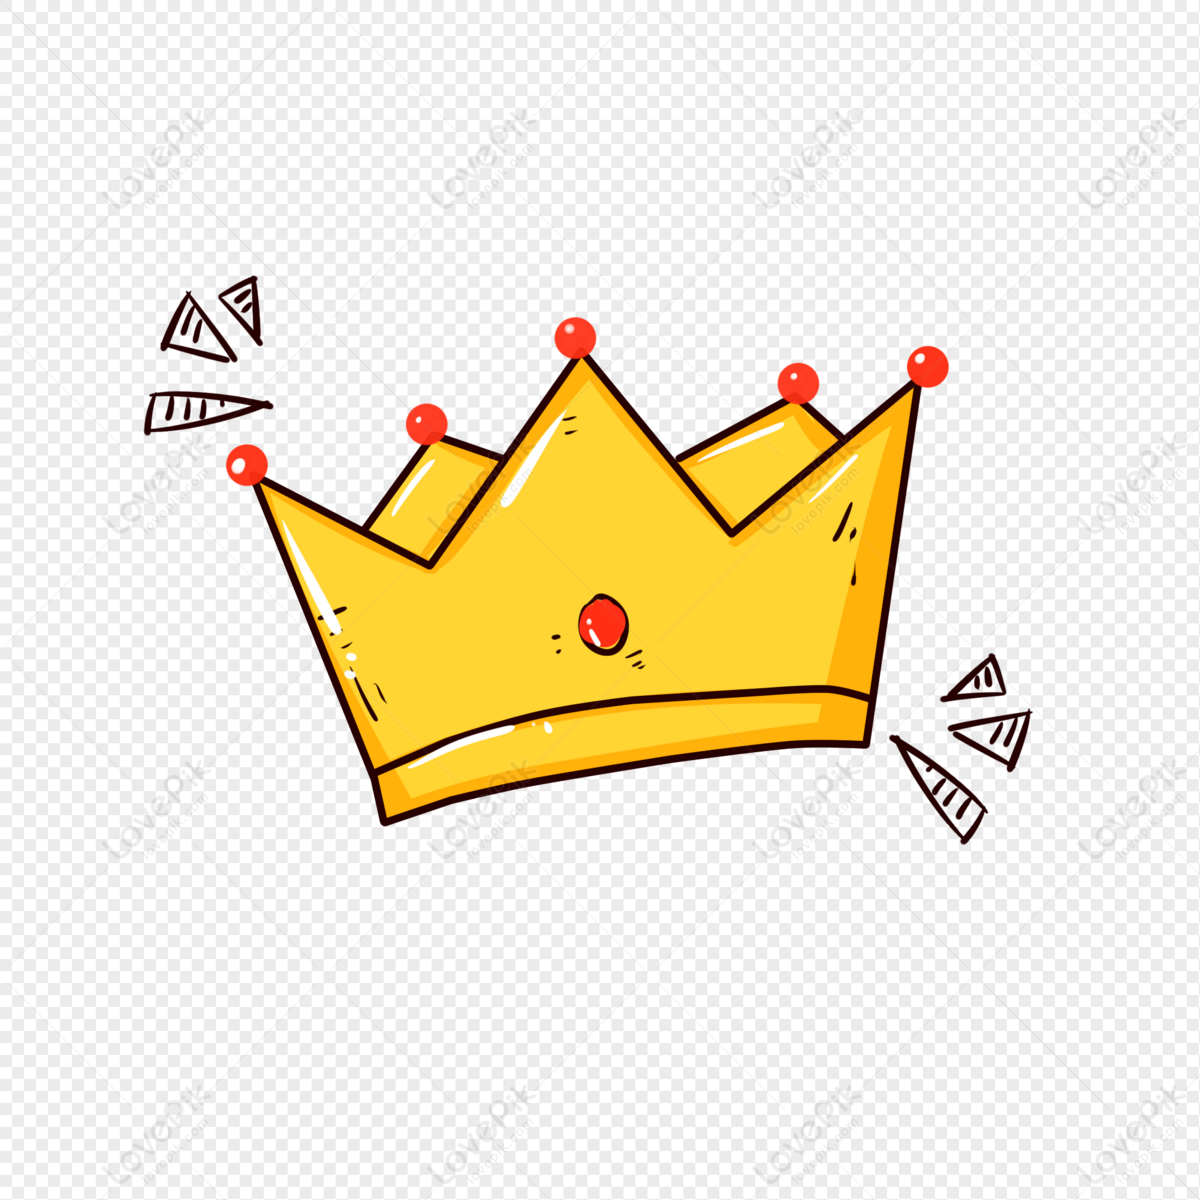 Cartoon Crown Free PNG And Clipart Image For Free Download - Lovepik |  401269949